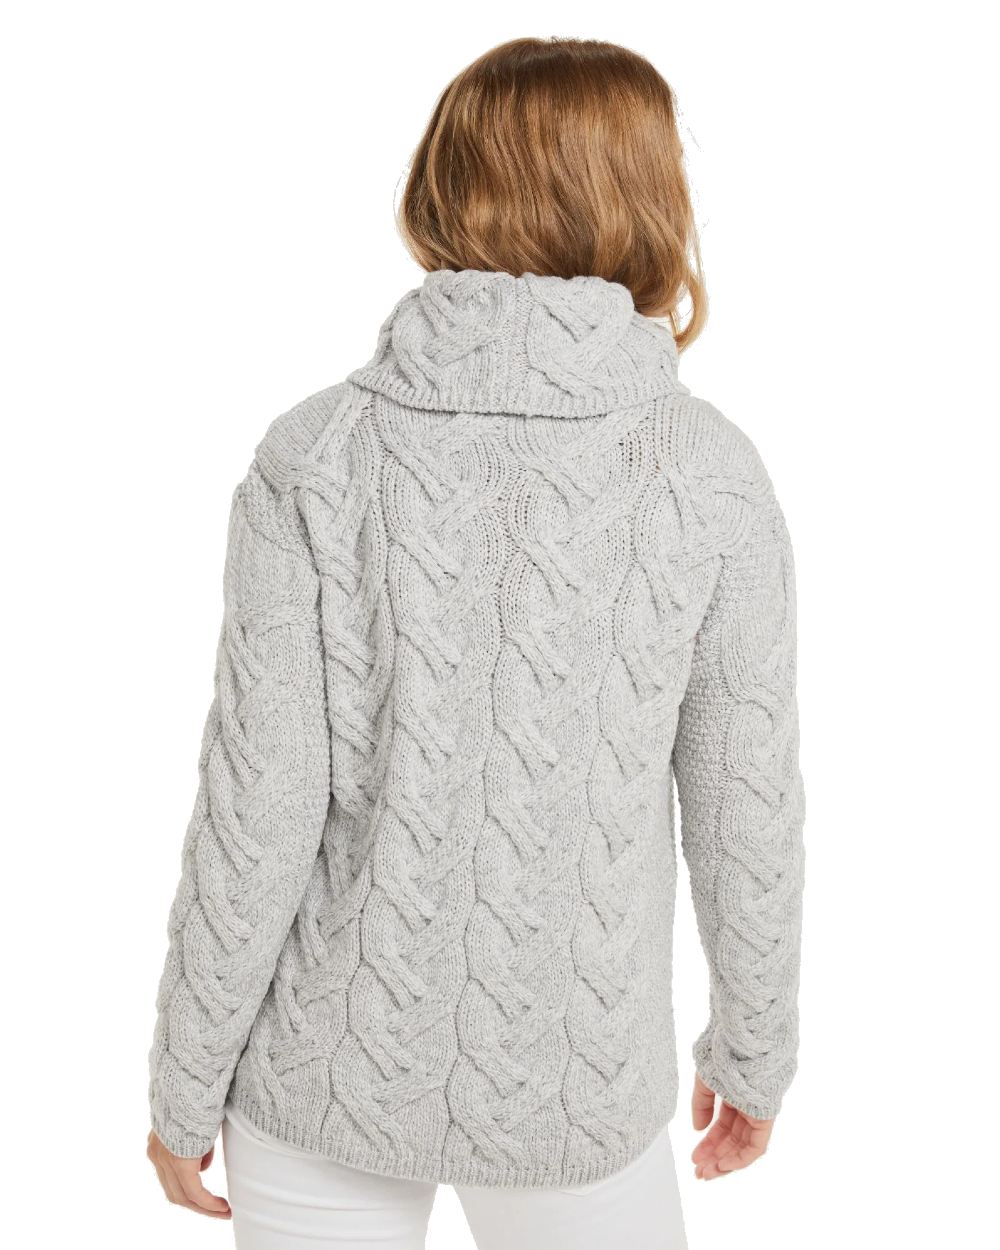 Aran Kinsale Womens Cable Sweater in Feathered Grey 